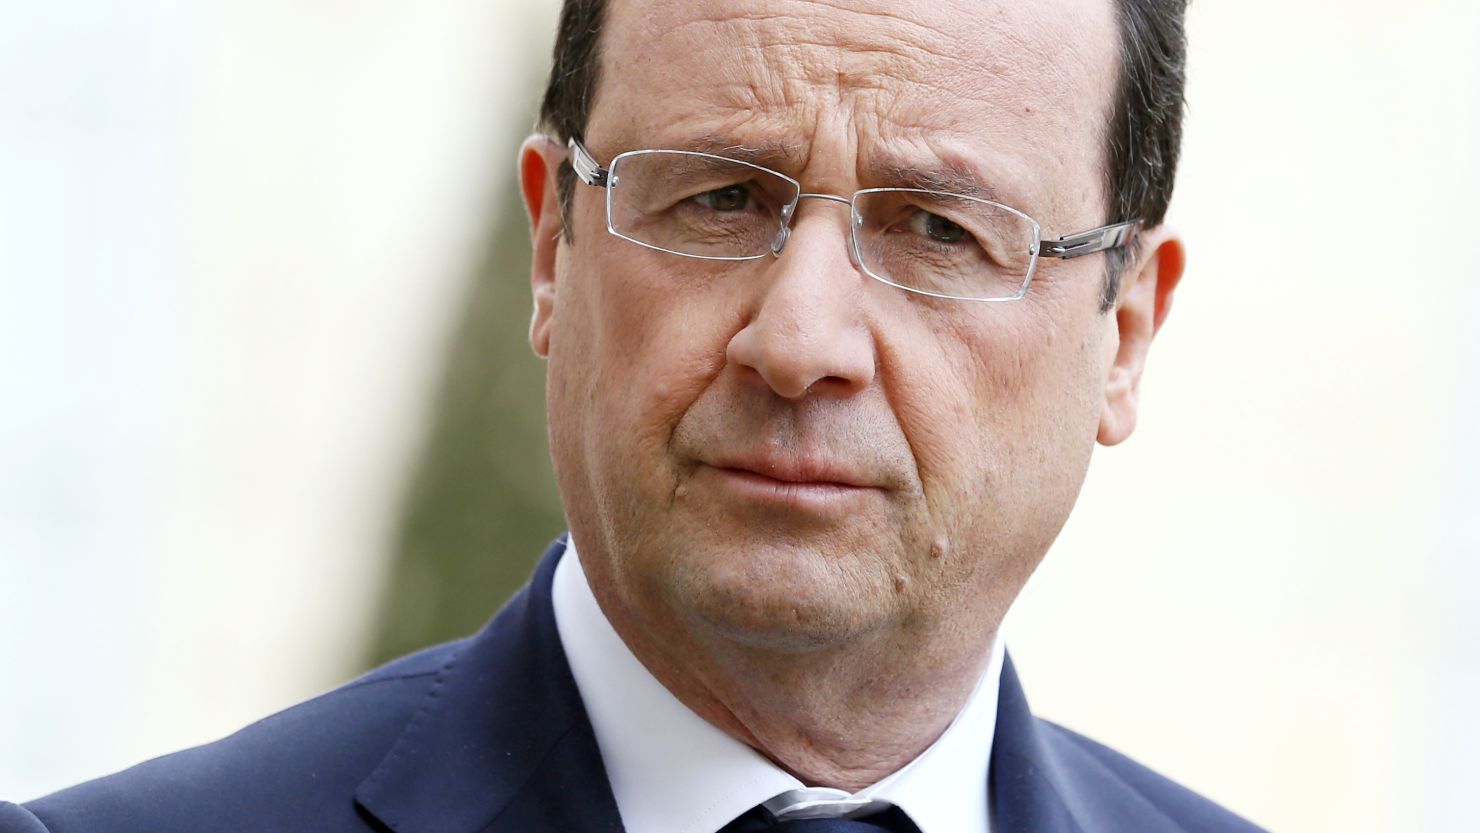 French president Francois Hollande pictured at the Elysee palace in Paris on April 11, 2013. 